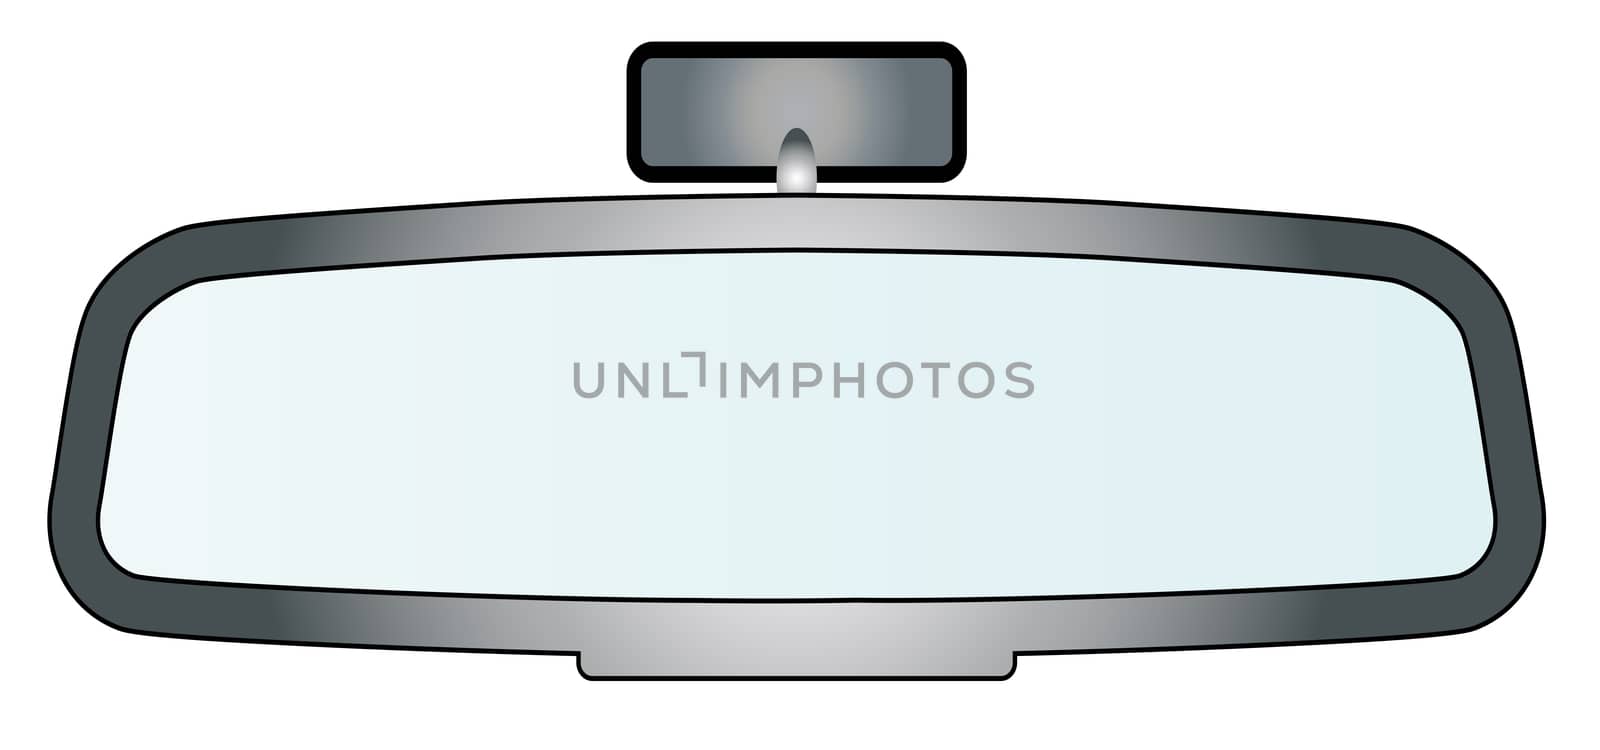 Depiction of a vehicle rear view mirror